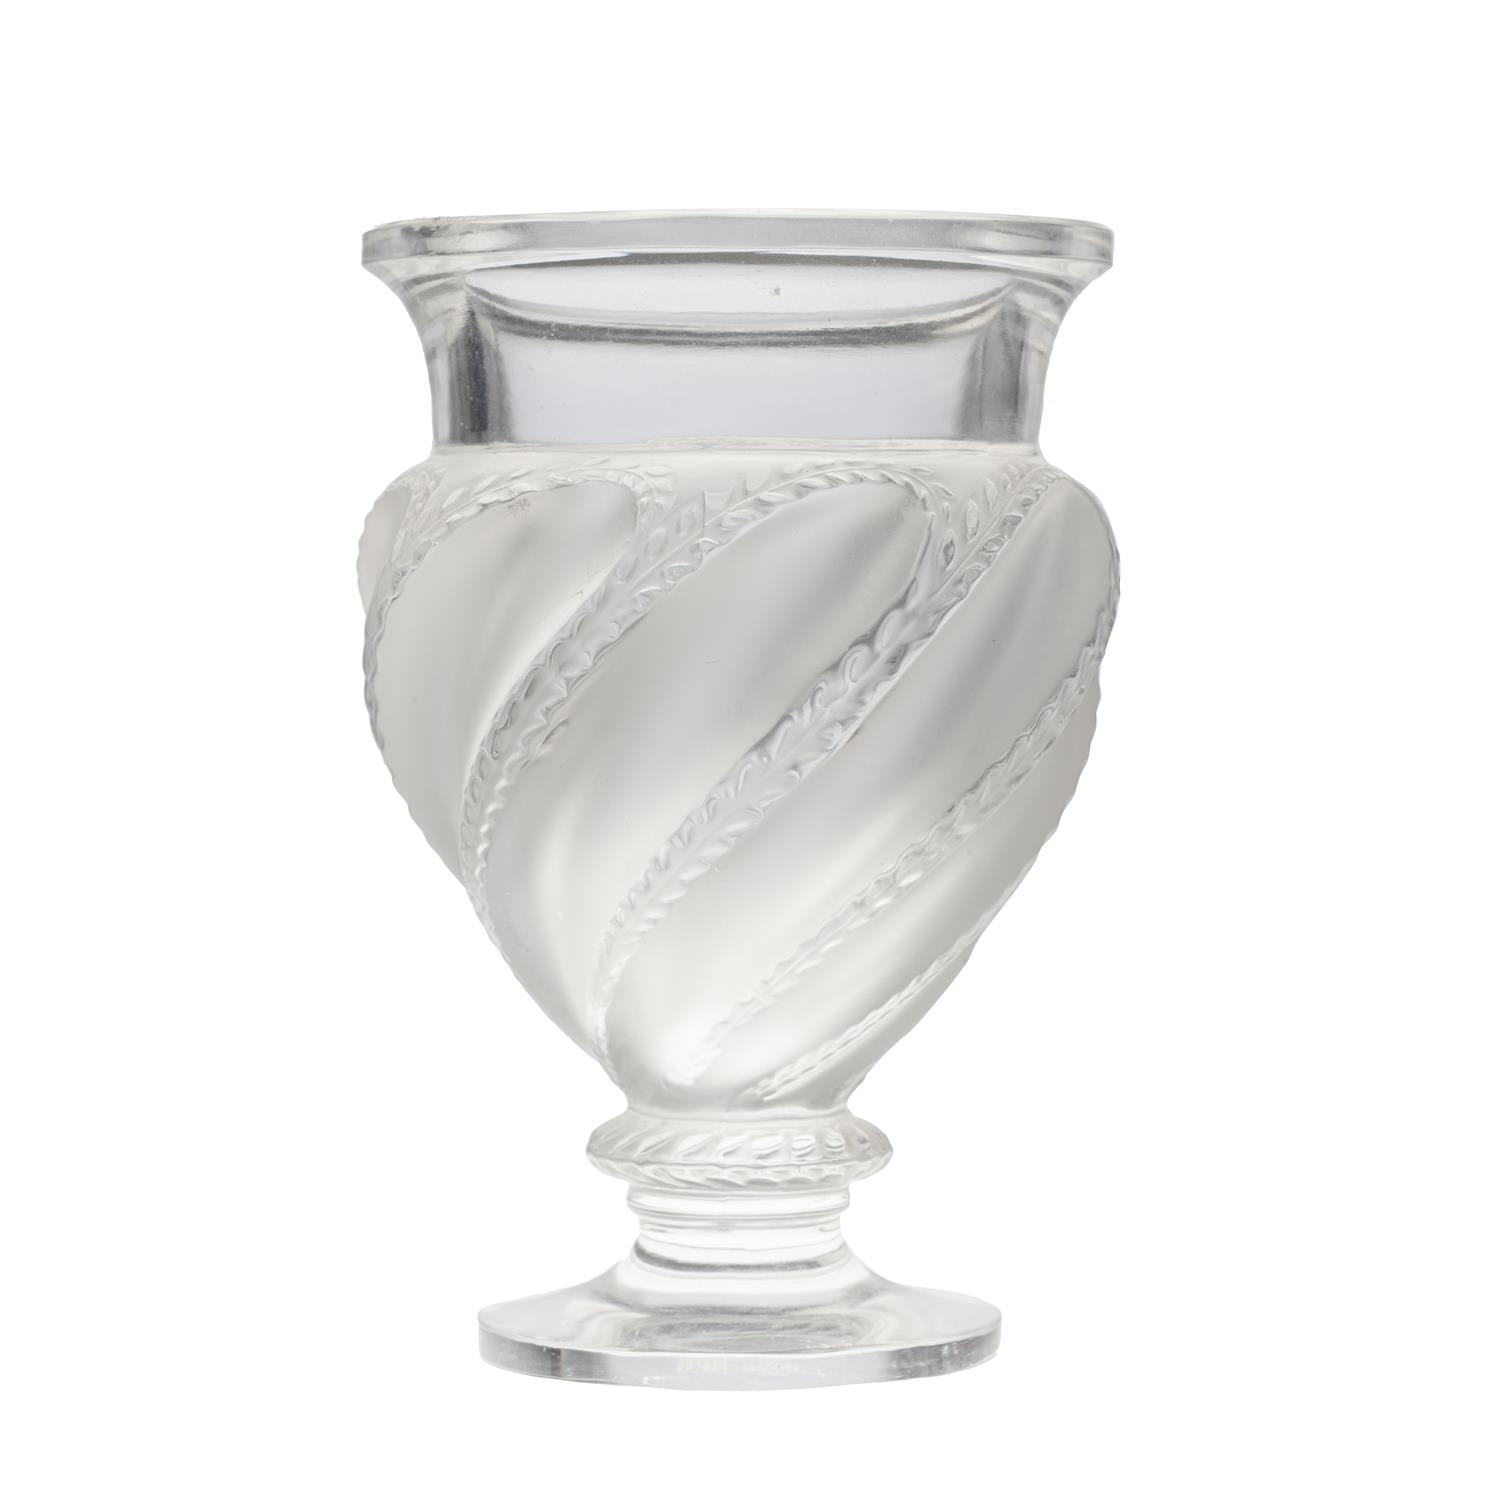 Lalique Ermenonville vase and Anemone flower head candlestick - Image 3 of 4